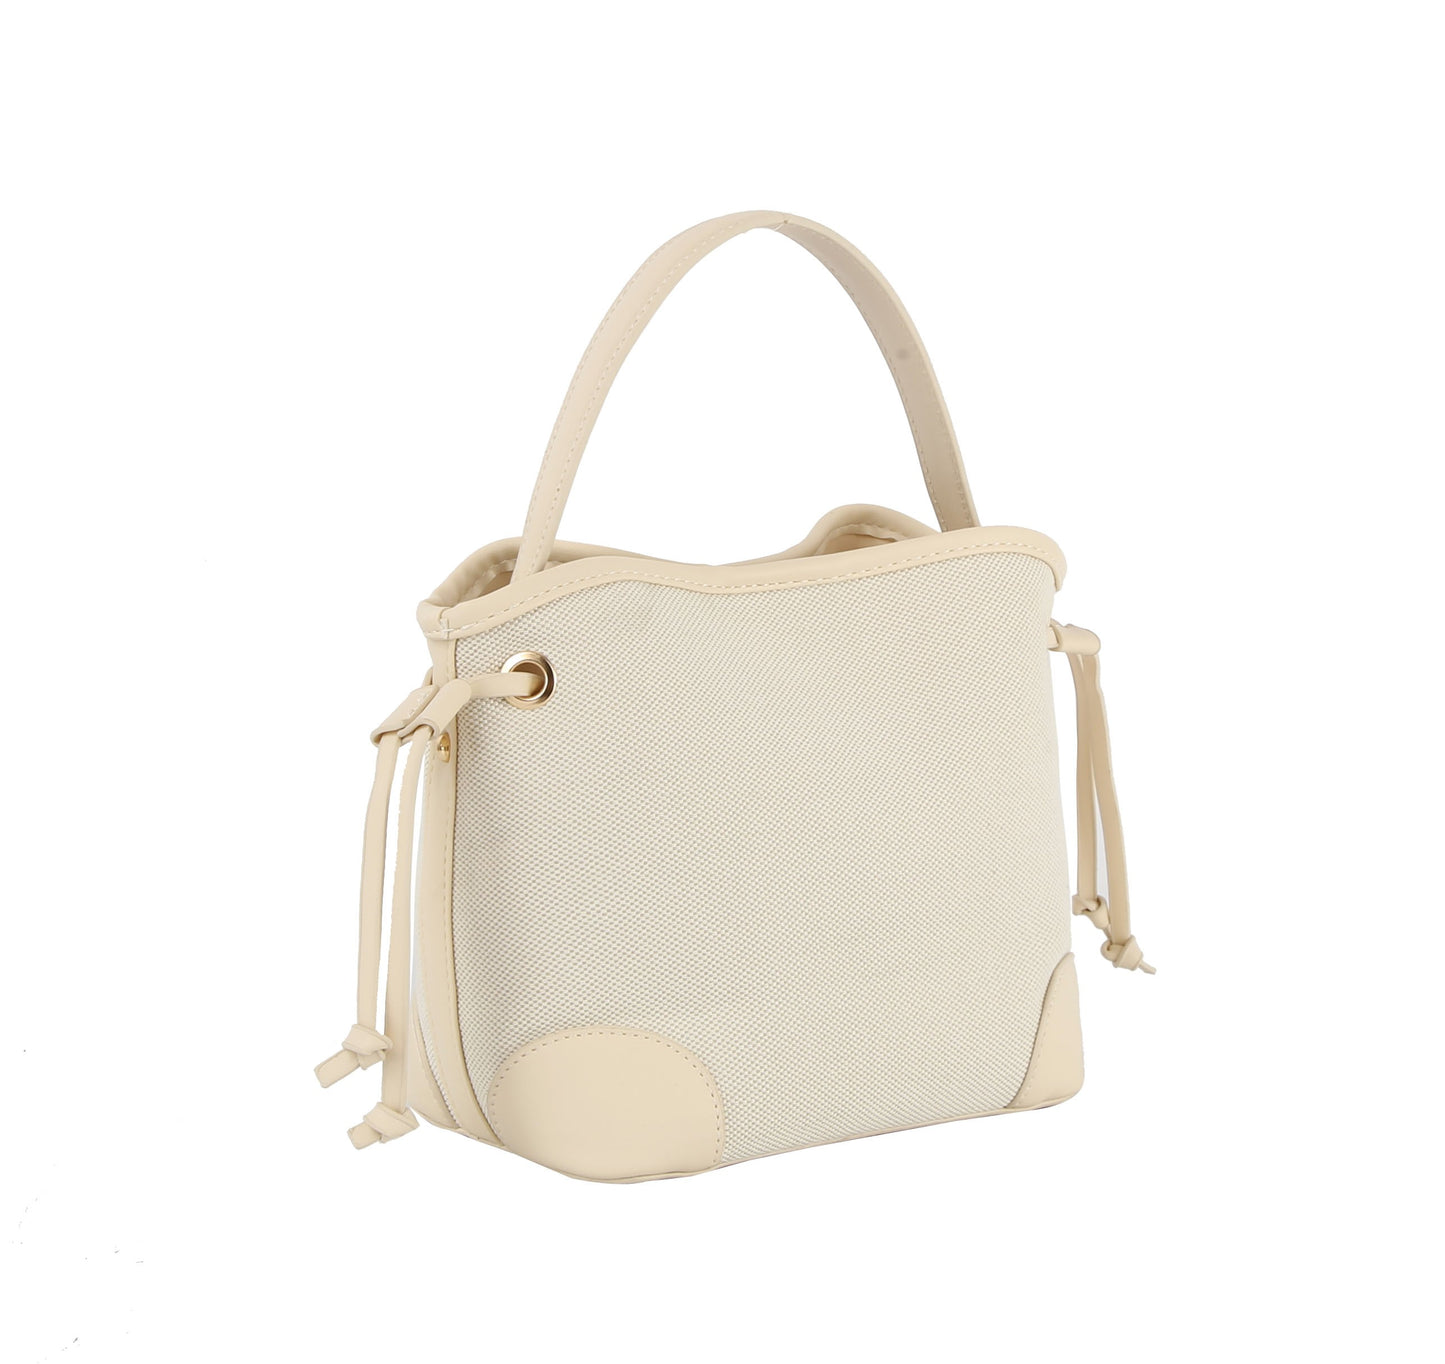 The Little Details Bag In Ivory